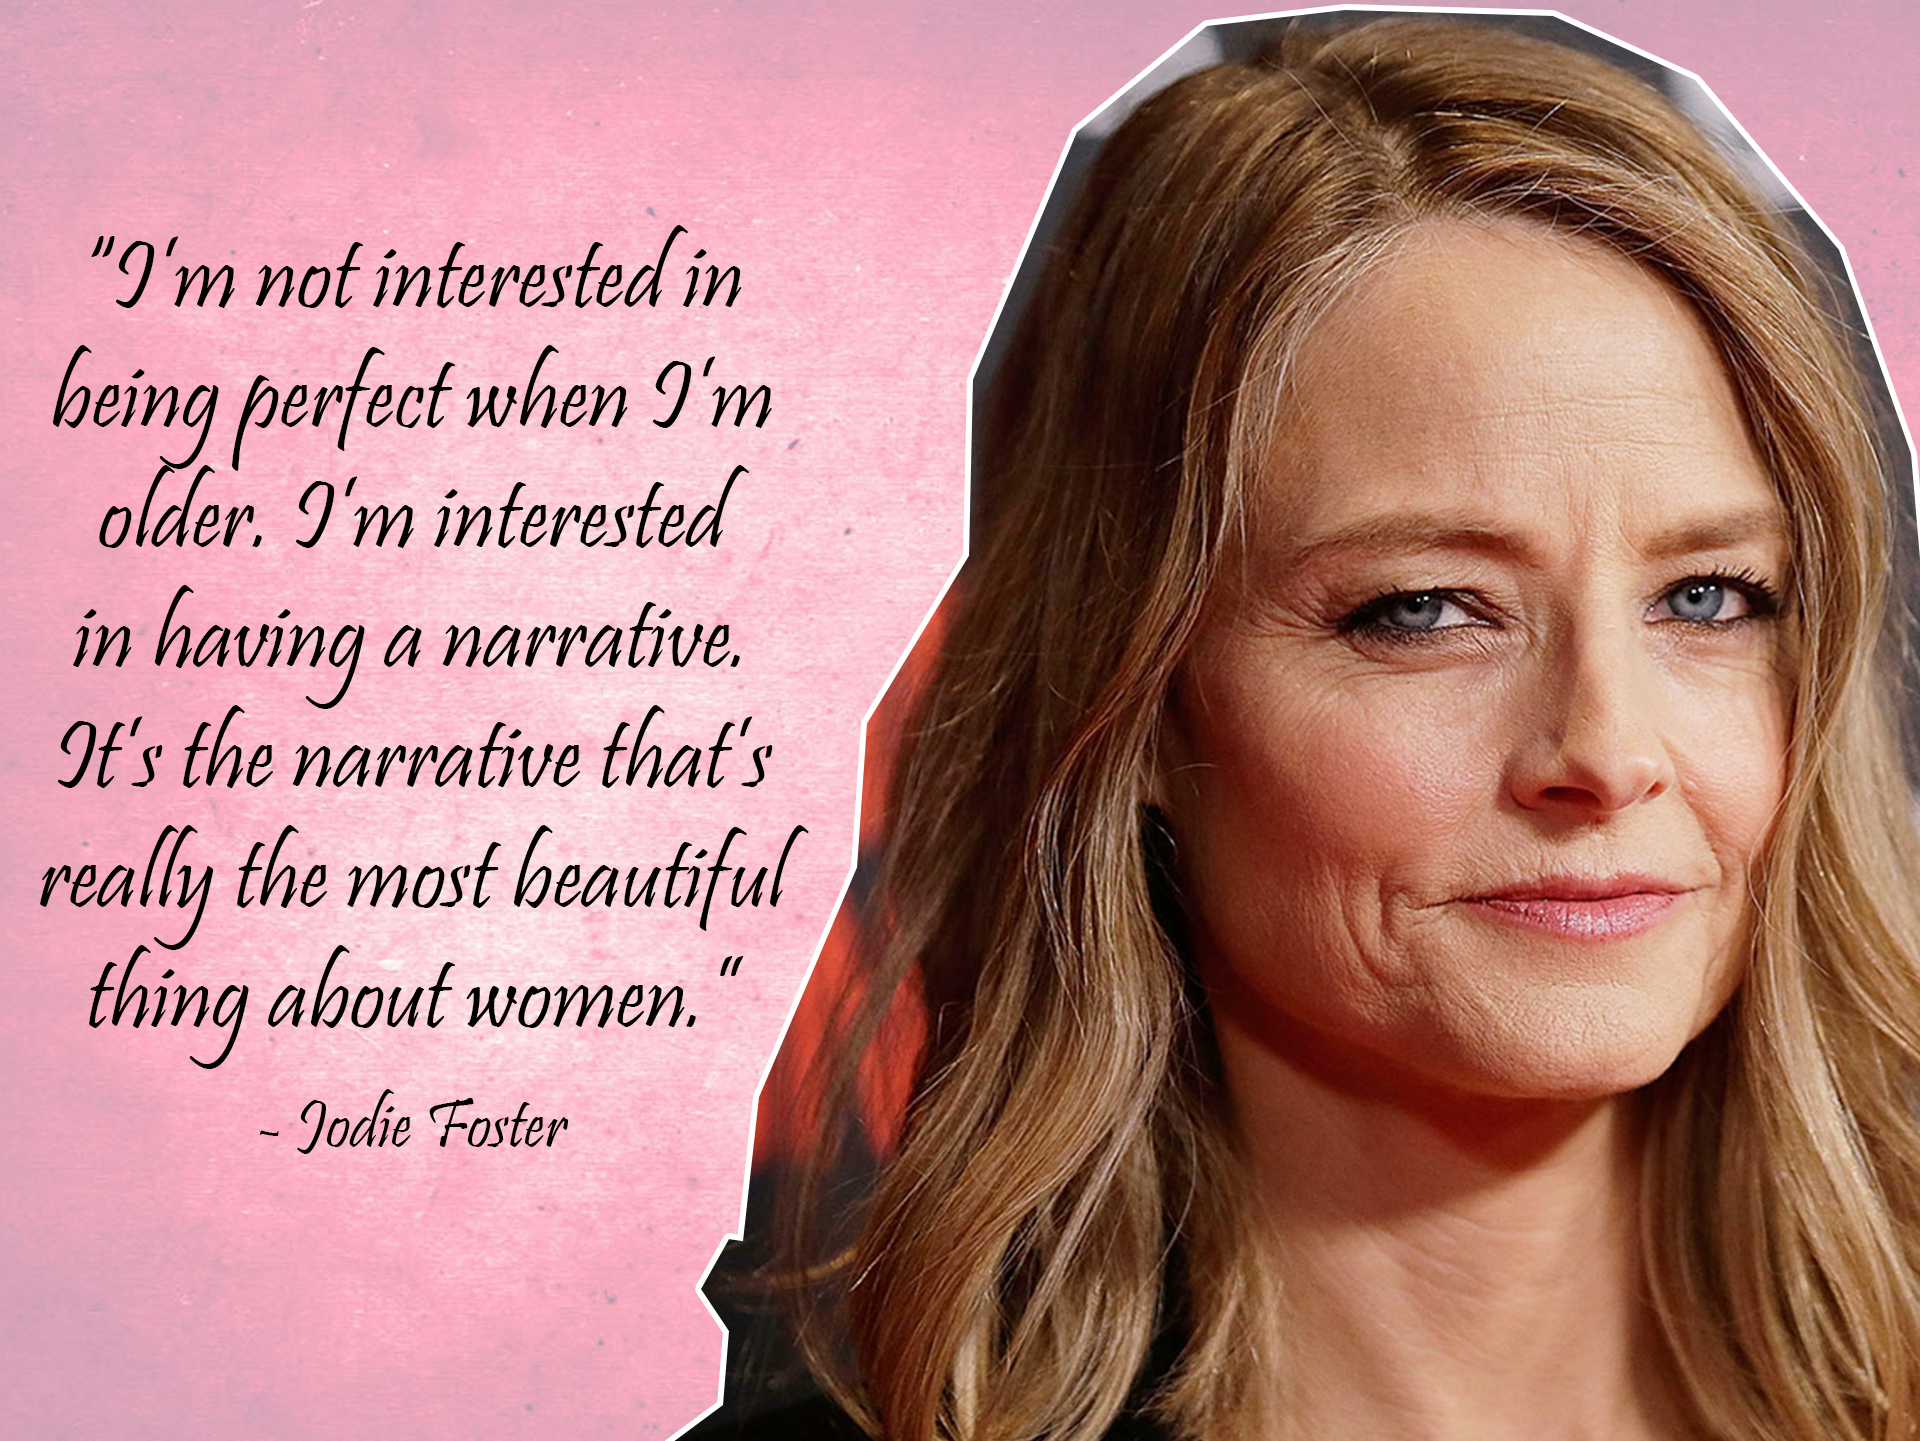 Jodie Foster on ageing